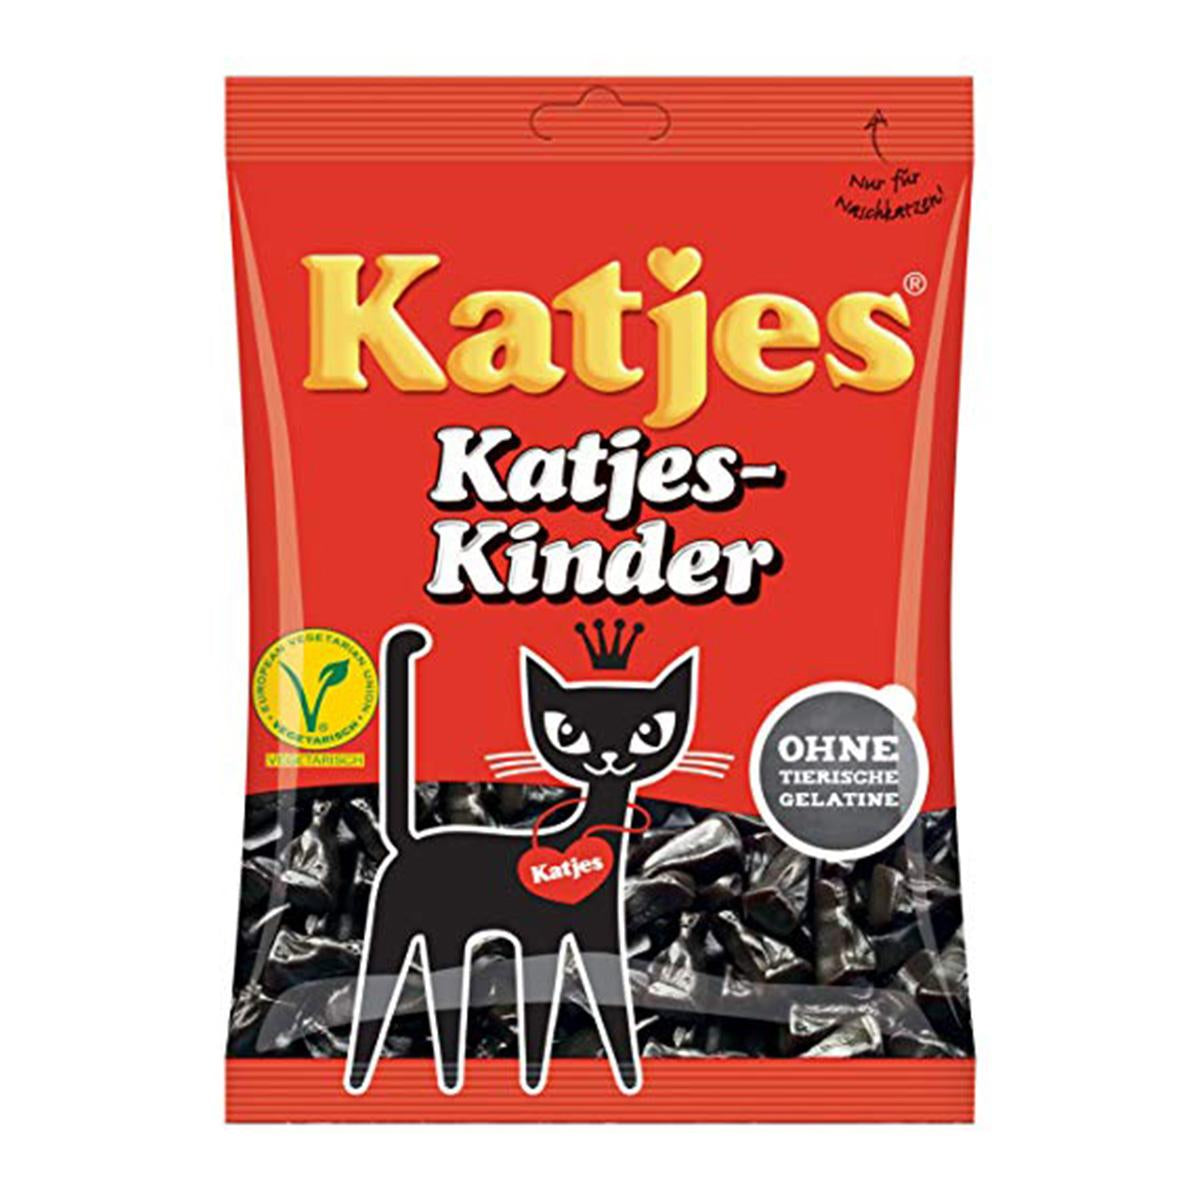 Primary image of Kinder Licorice Cat-Shaped Drops